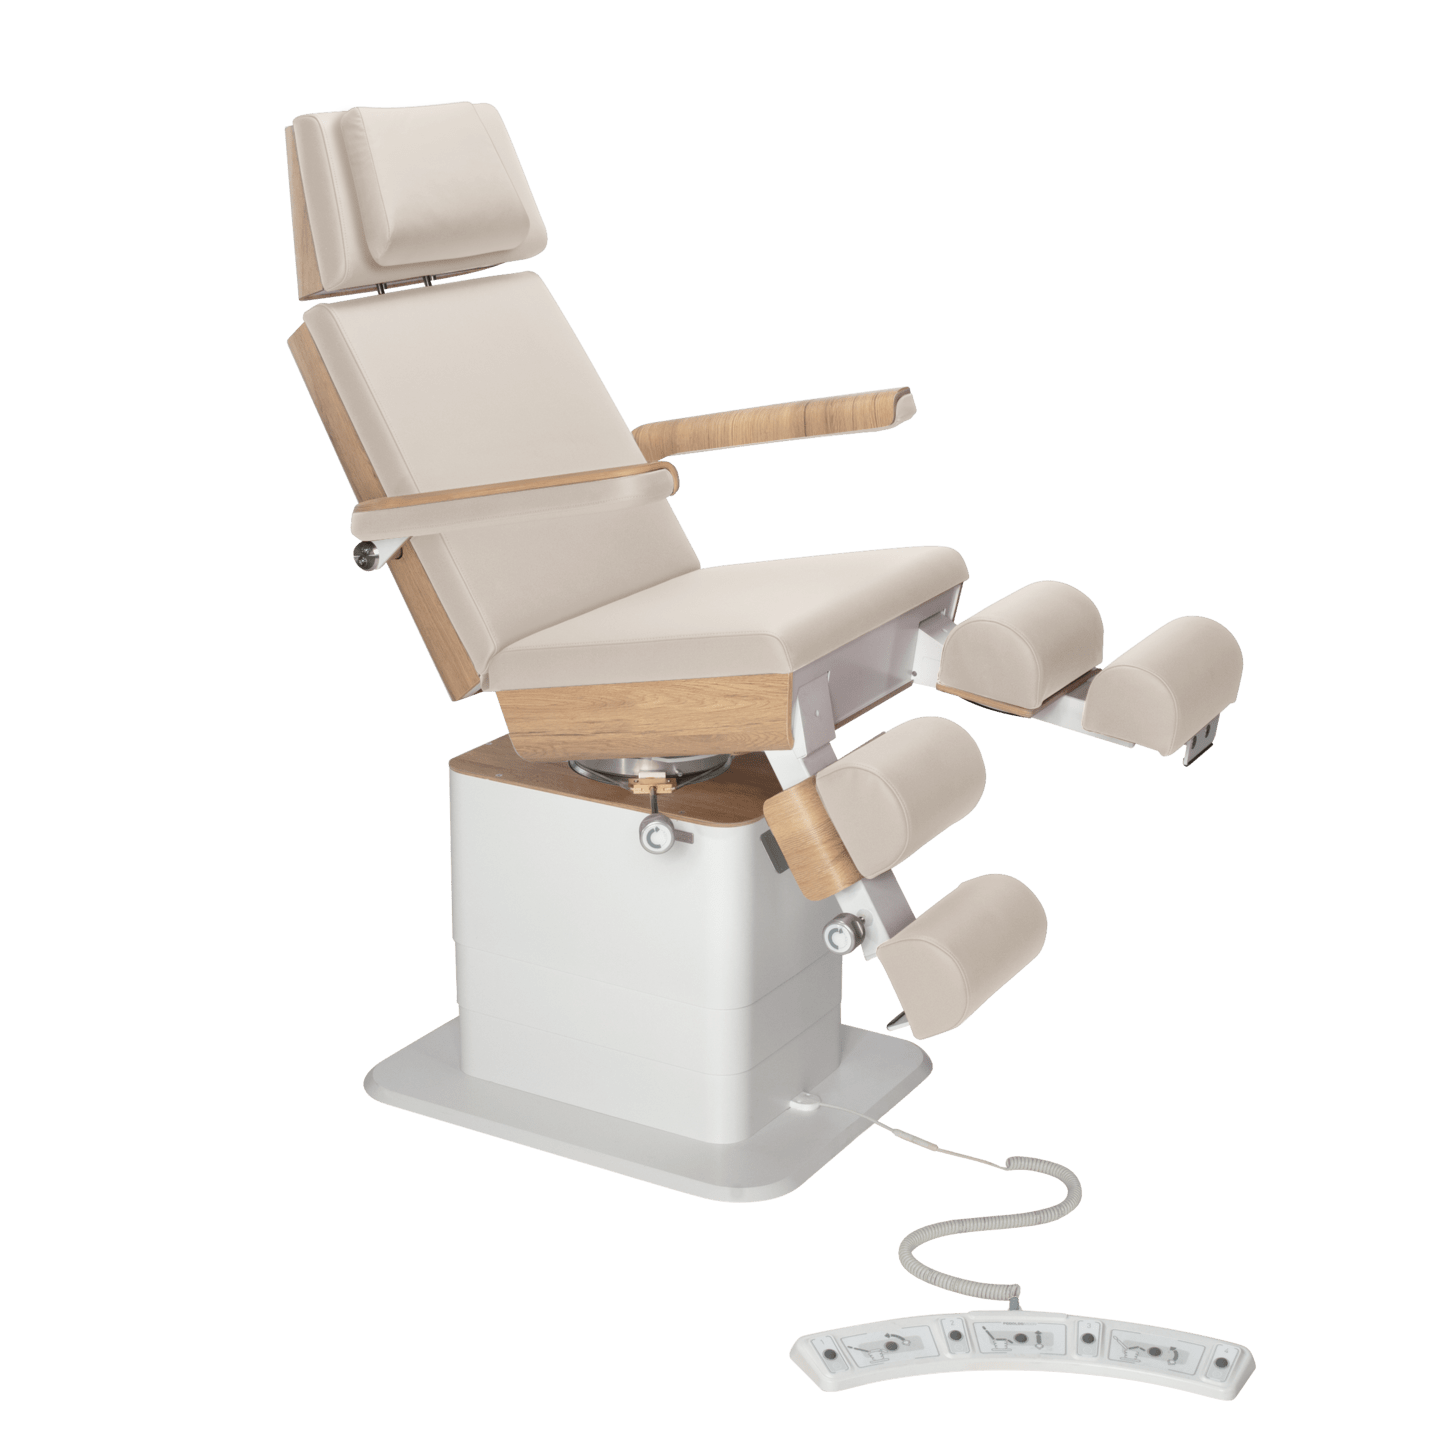 RUCK - MOON Podiatry Chair/Couch (with gas assisted leg sections) in natural